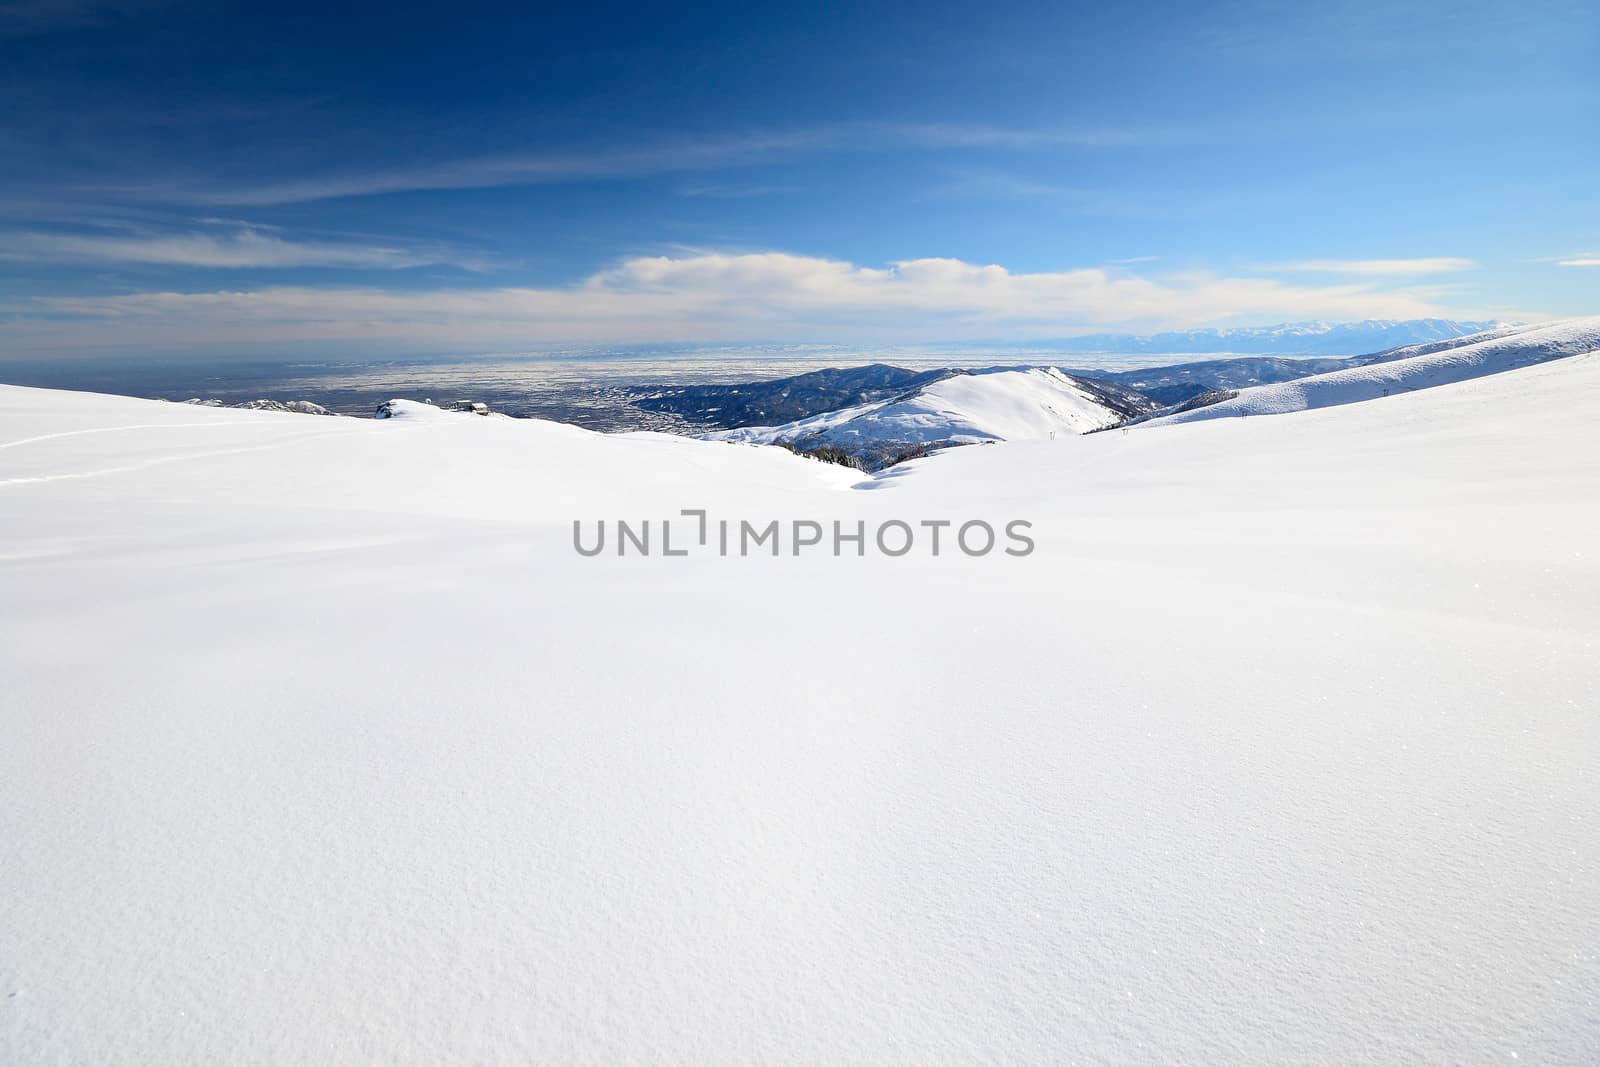 Snowy slope with superb panoramic view by fbxx